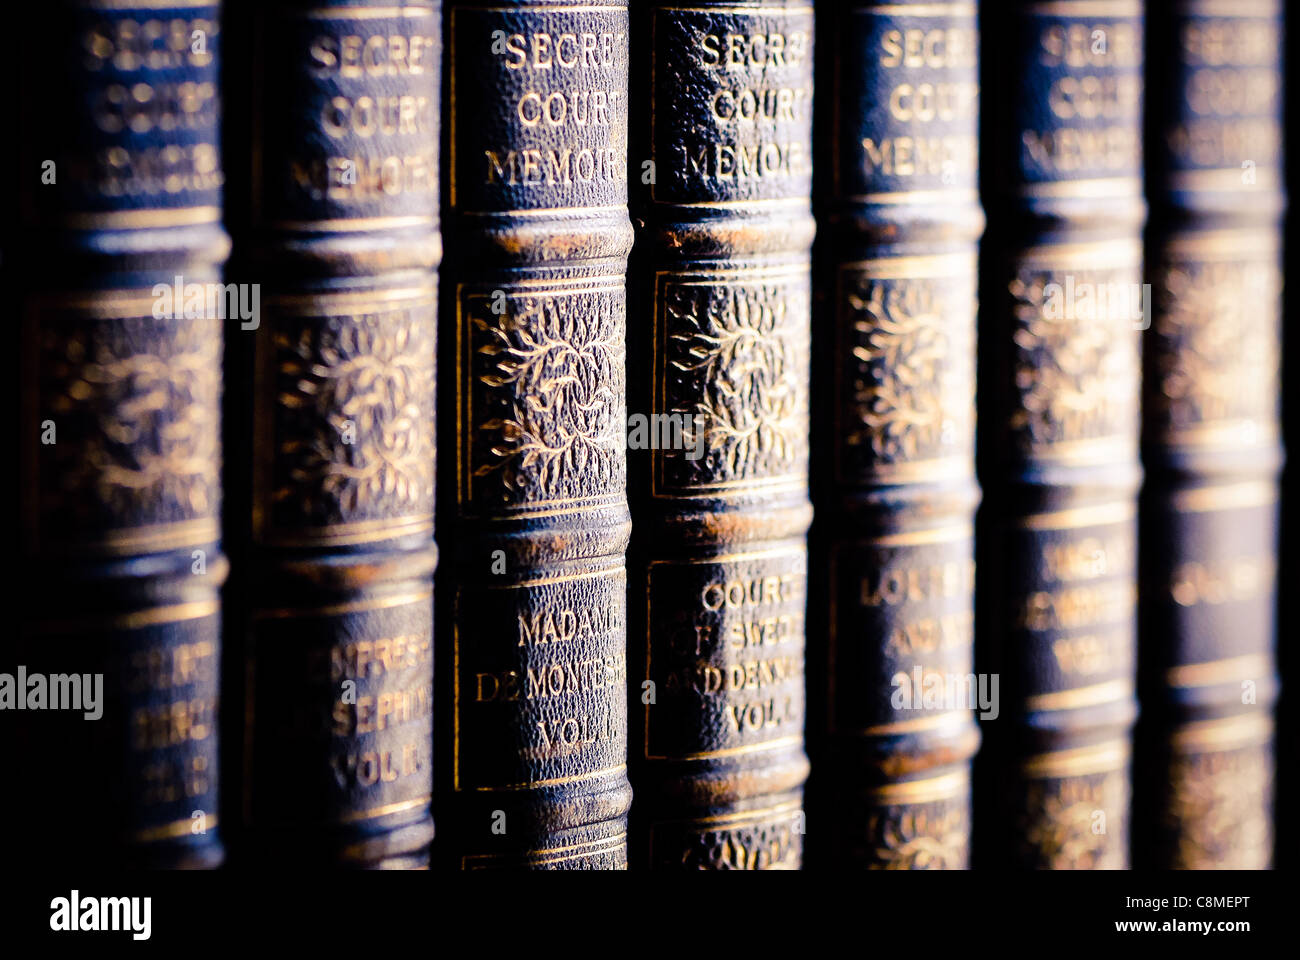 I line of old well read books Stock Photo